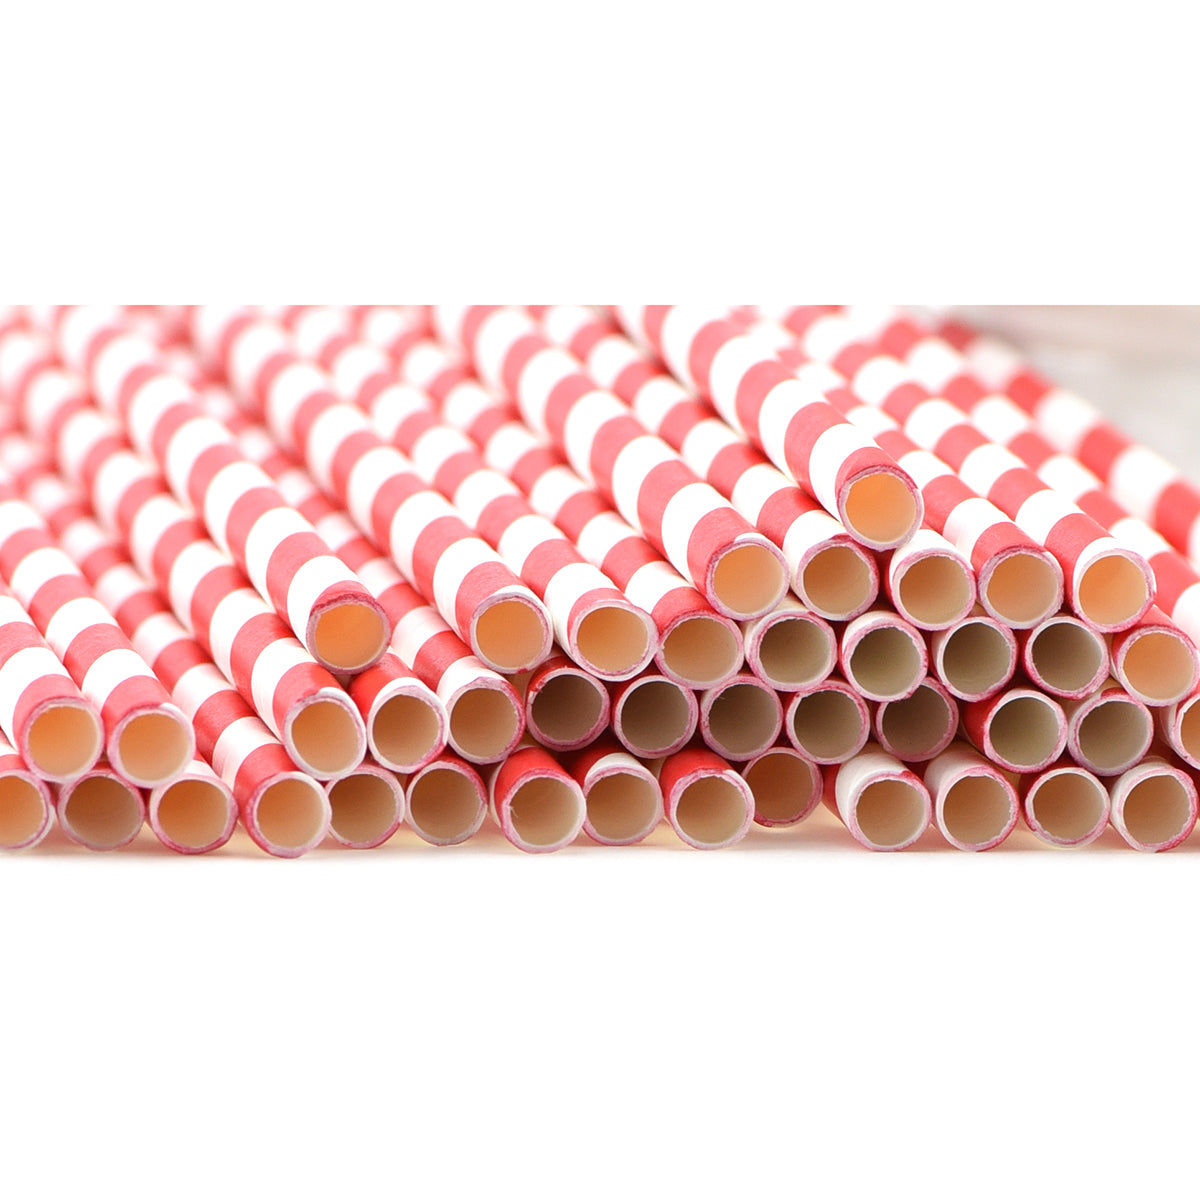 EcoChoice 8 1/2 Colossal Red and White Striped Unwrapped Paper